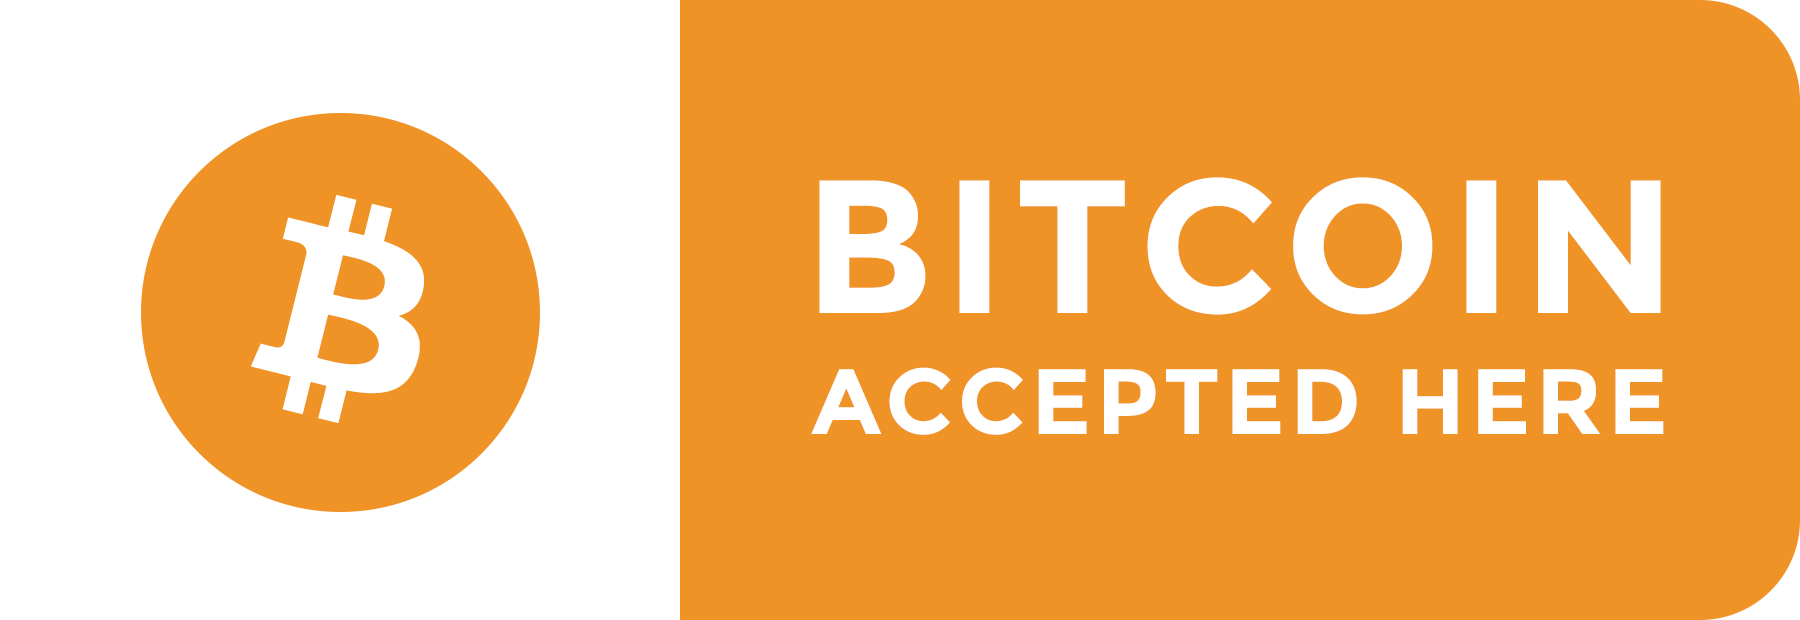 Bitcoin Accepted Here Button PNG Image